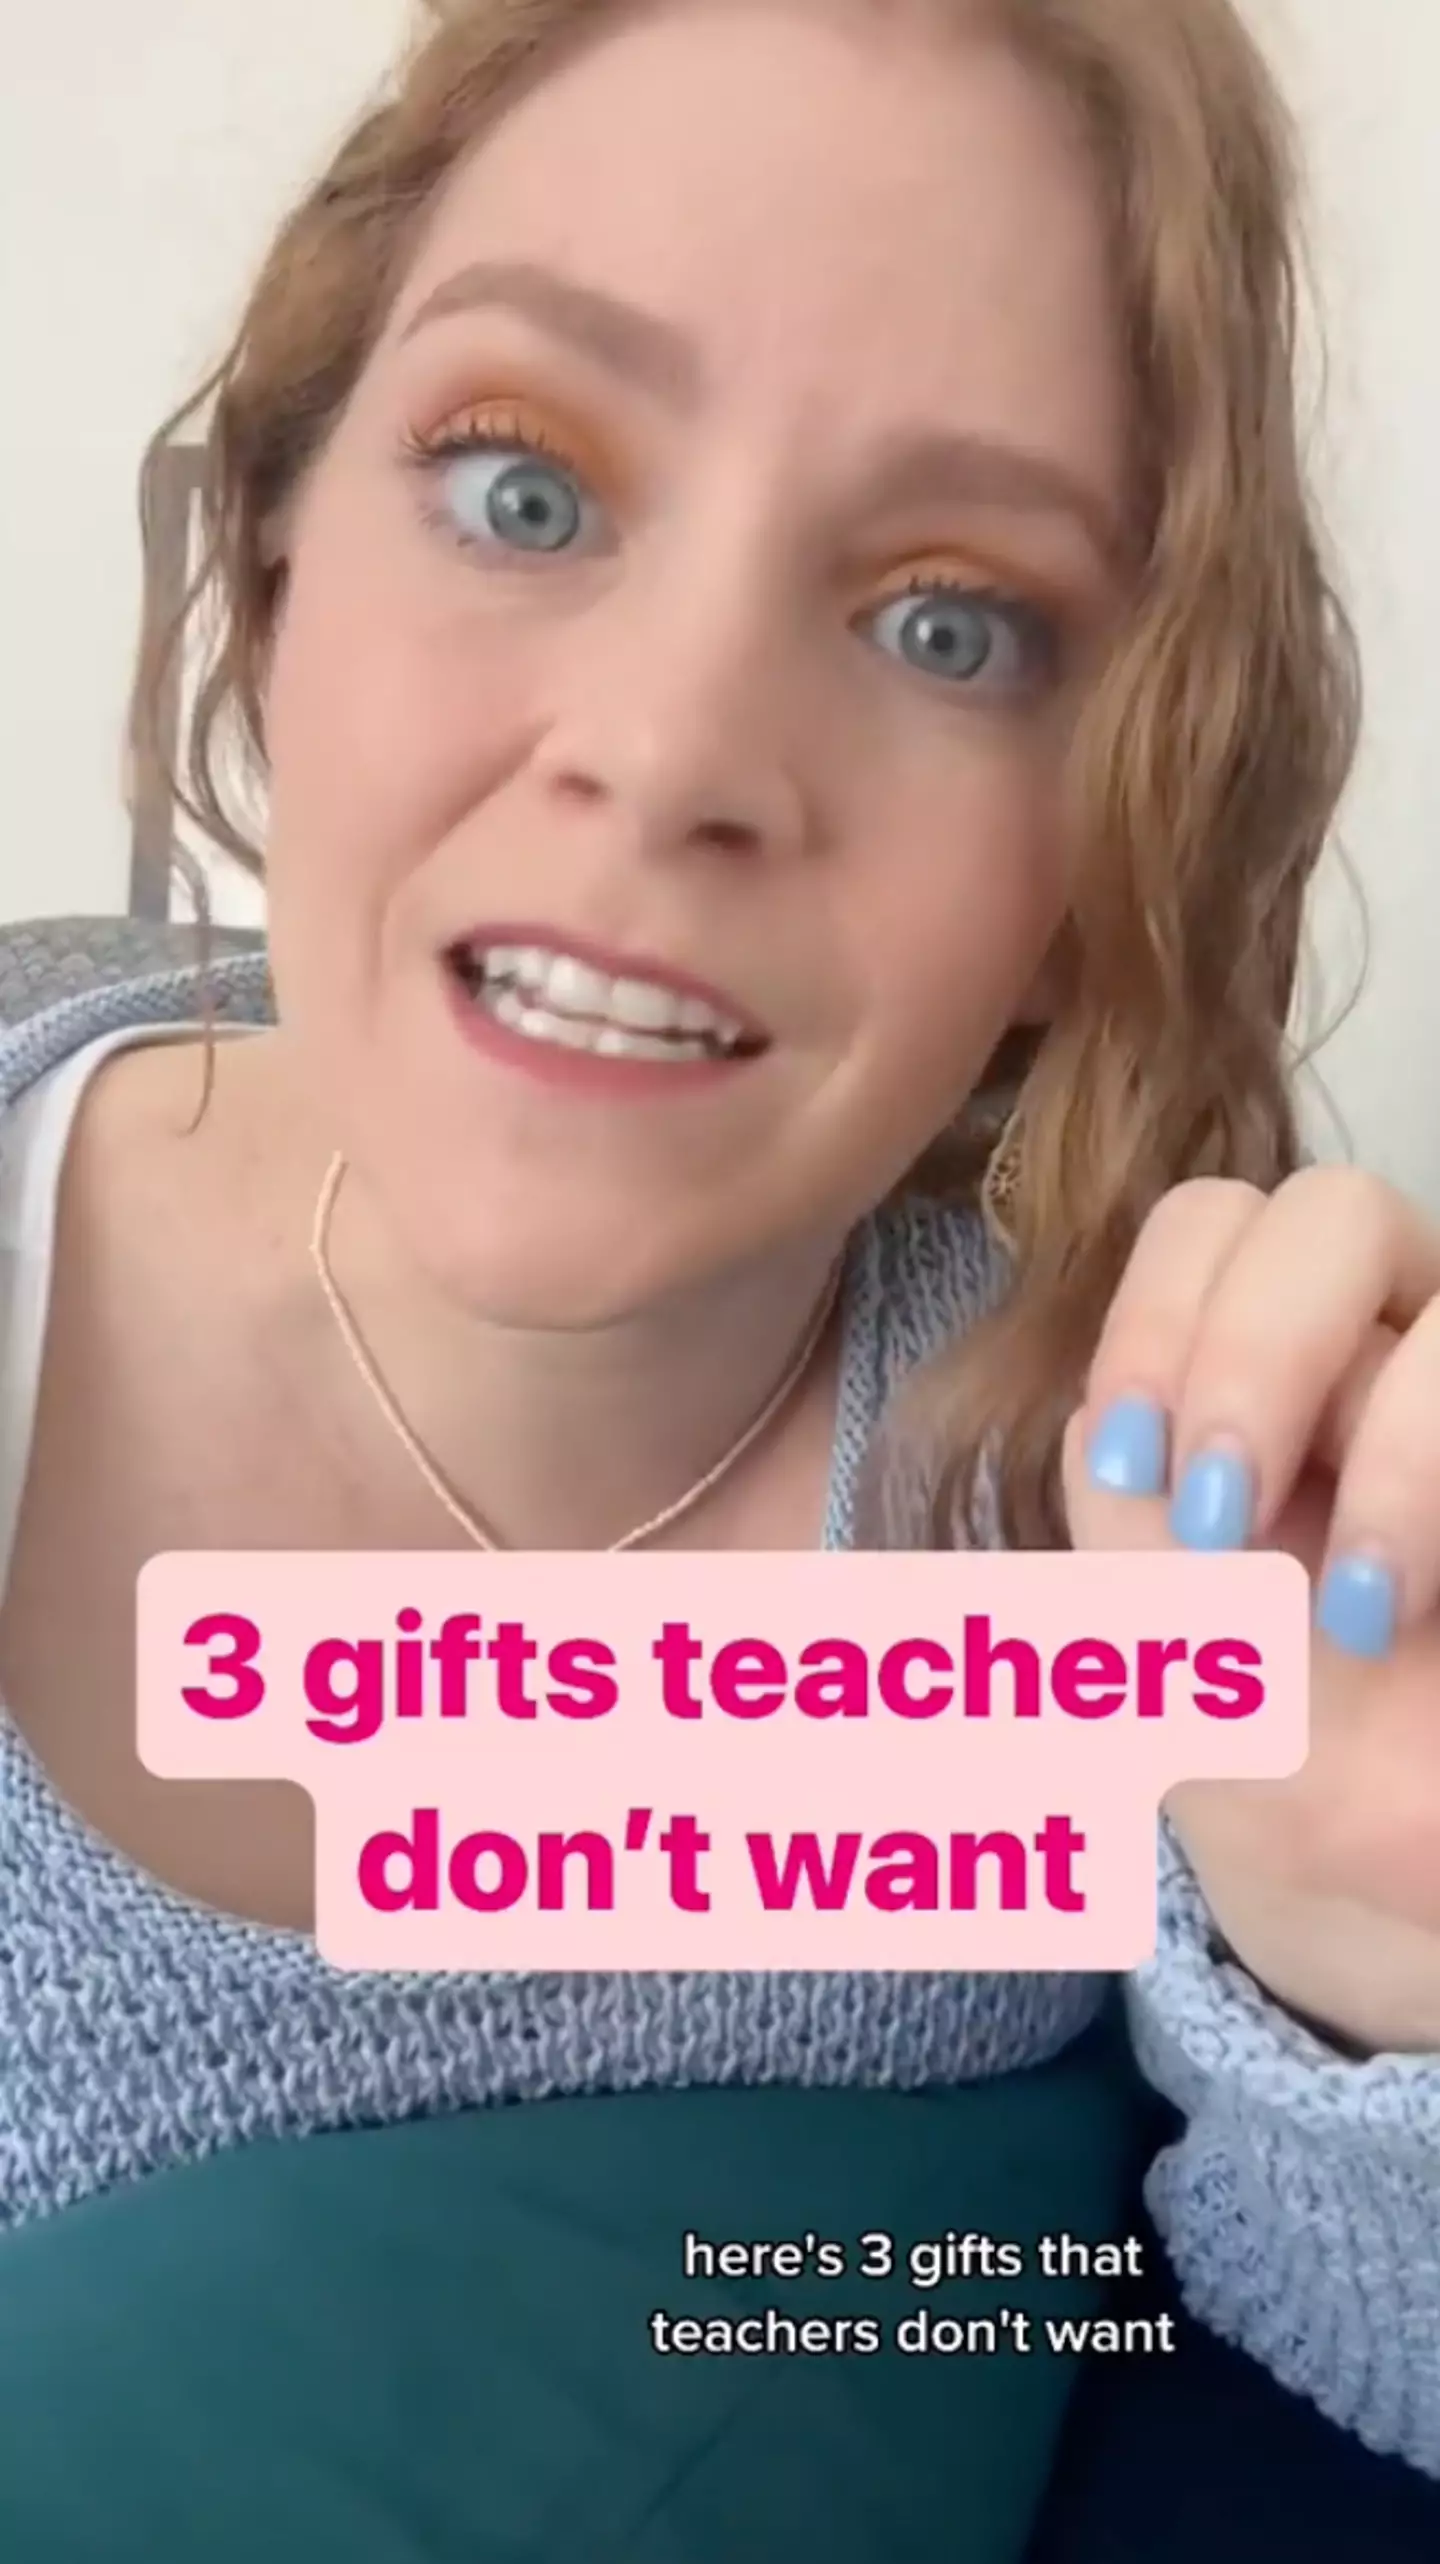 She shared a list of three things teachers don't want.